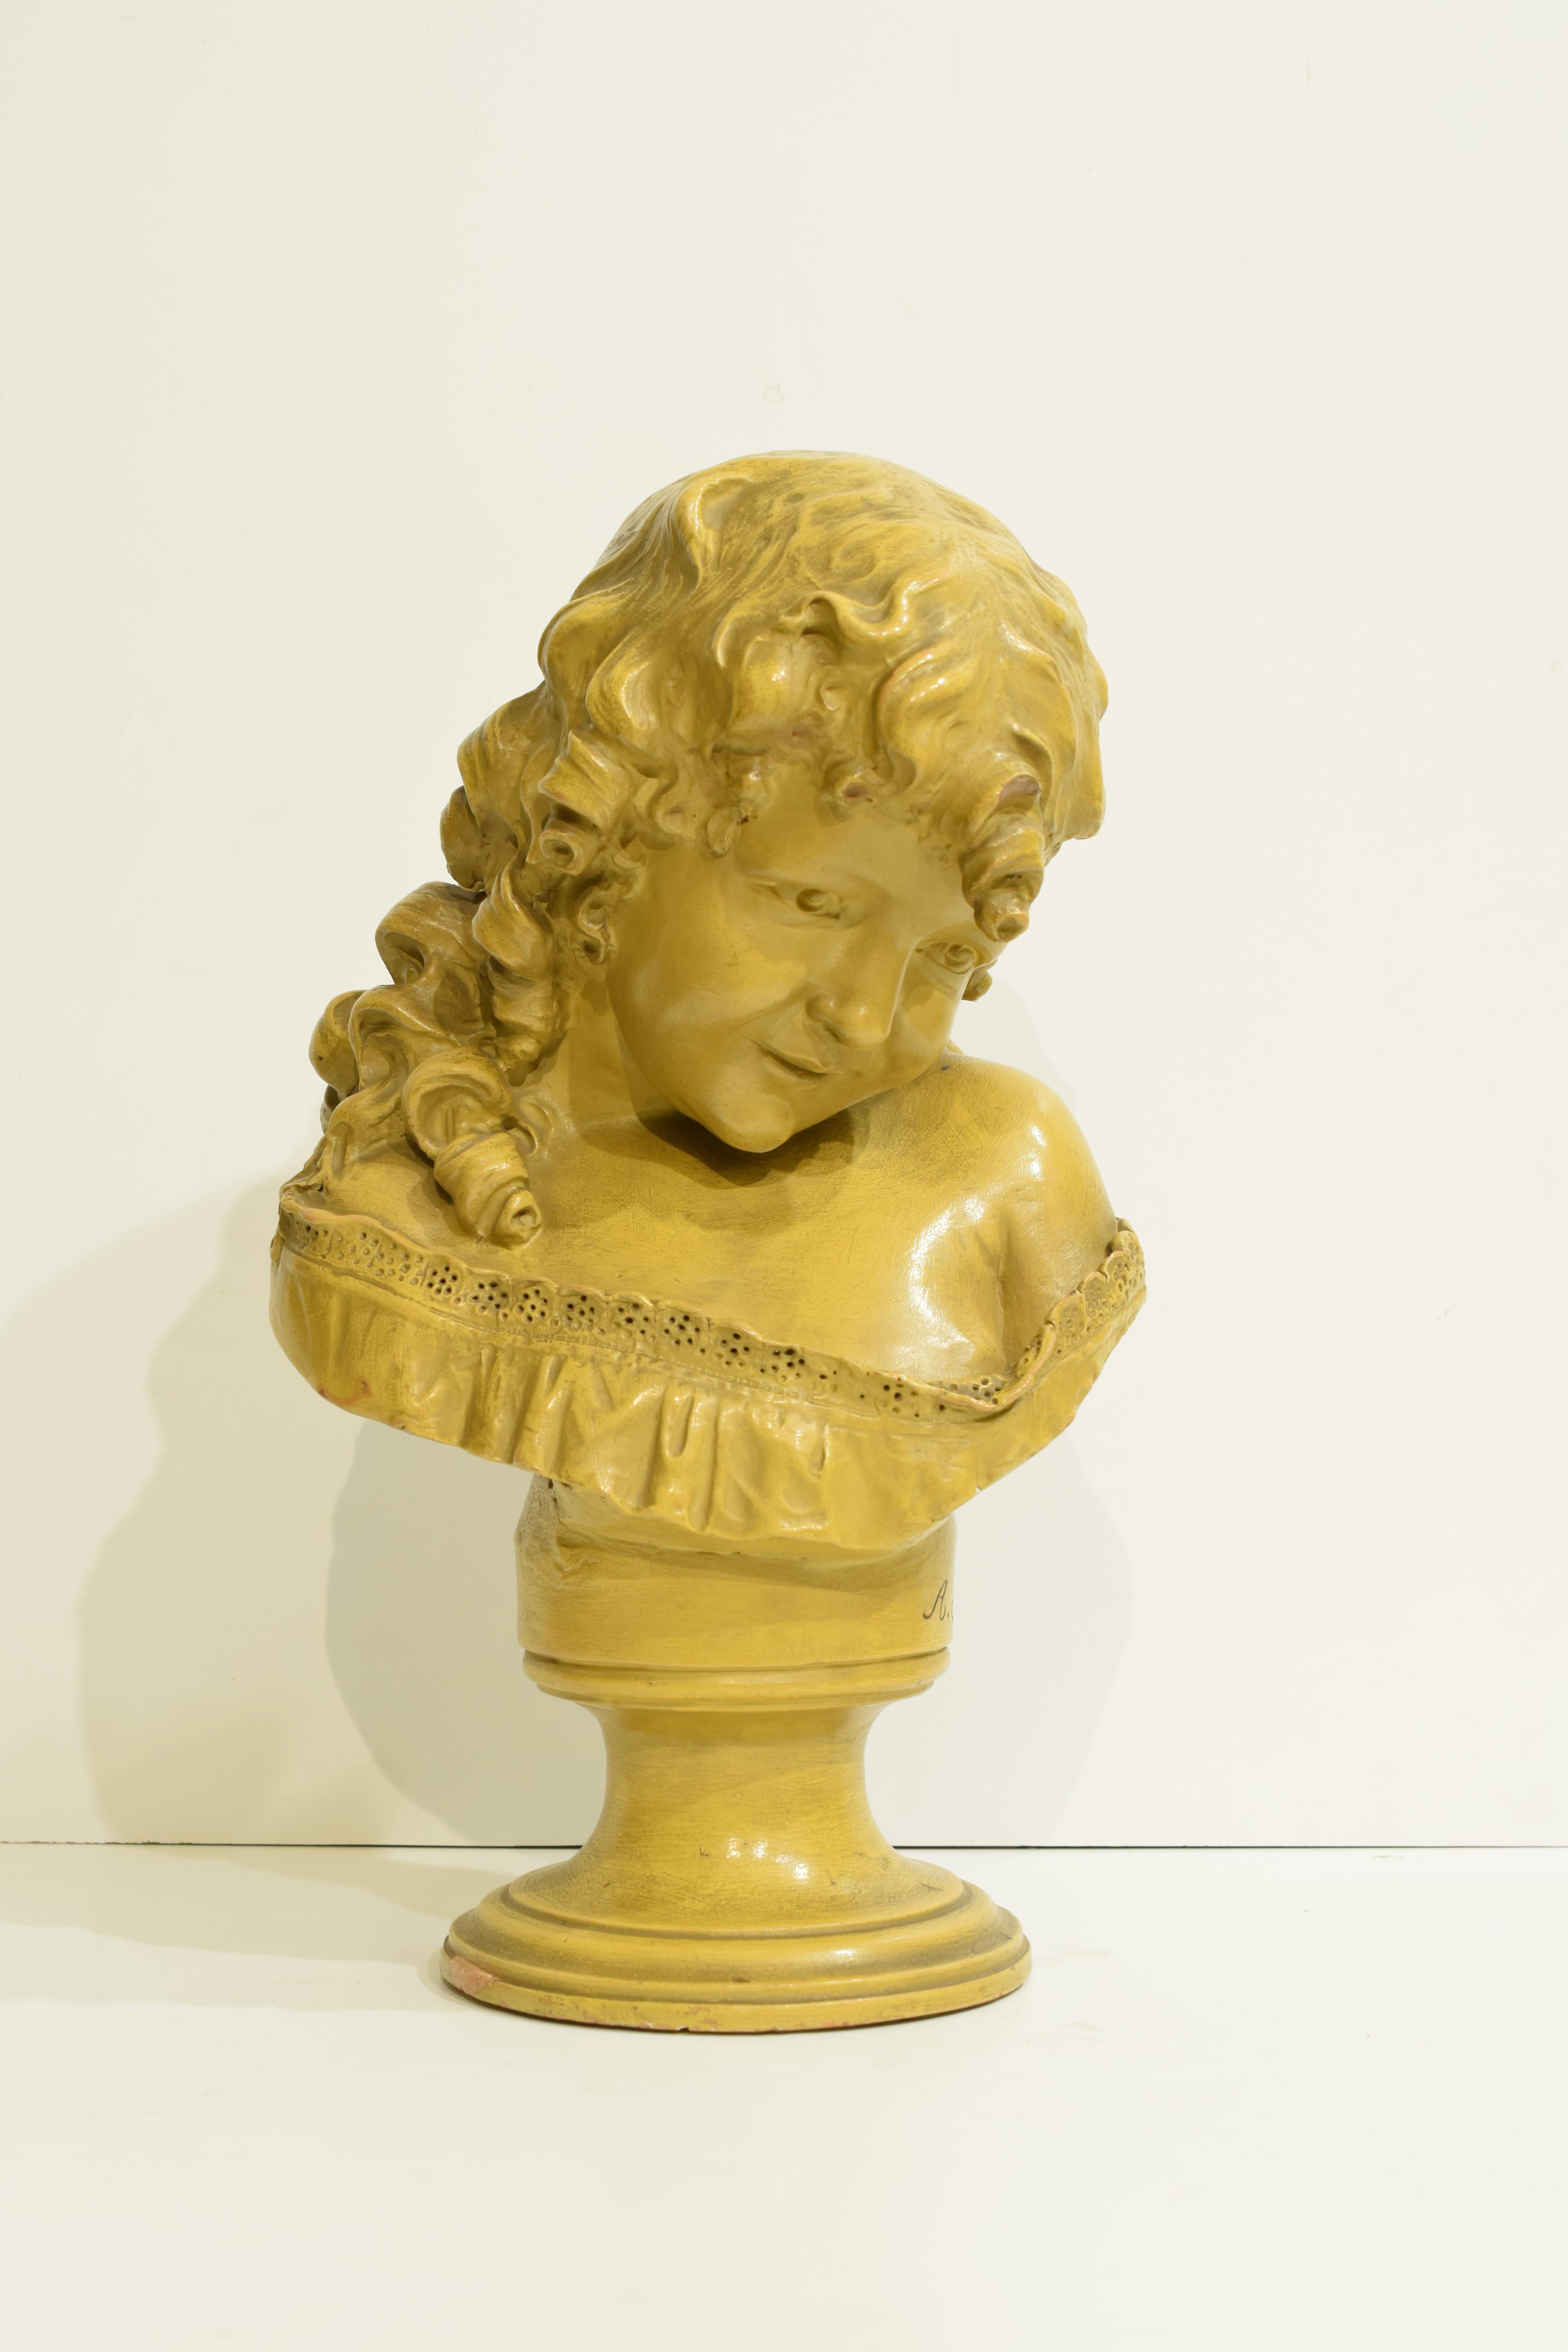 Andrea Flaibani Friulian sculptor (Udine, Italy 1846 - Udine, Italy 1897)
Terracotta
Measures: Height 38 cm
Width cm 23
Base diameter cm 15
Weight kg approx. 5.5.
 
As a young man he was a carving carpenter. For his artistic vocation he was